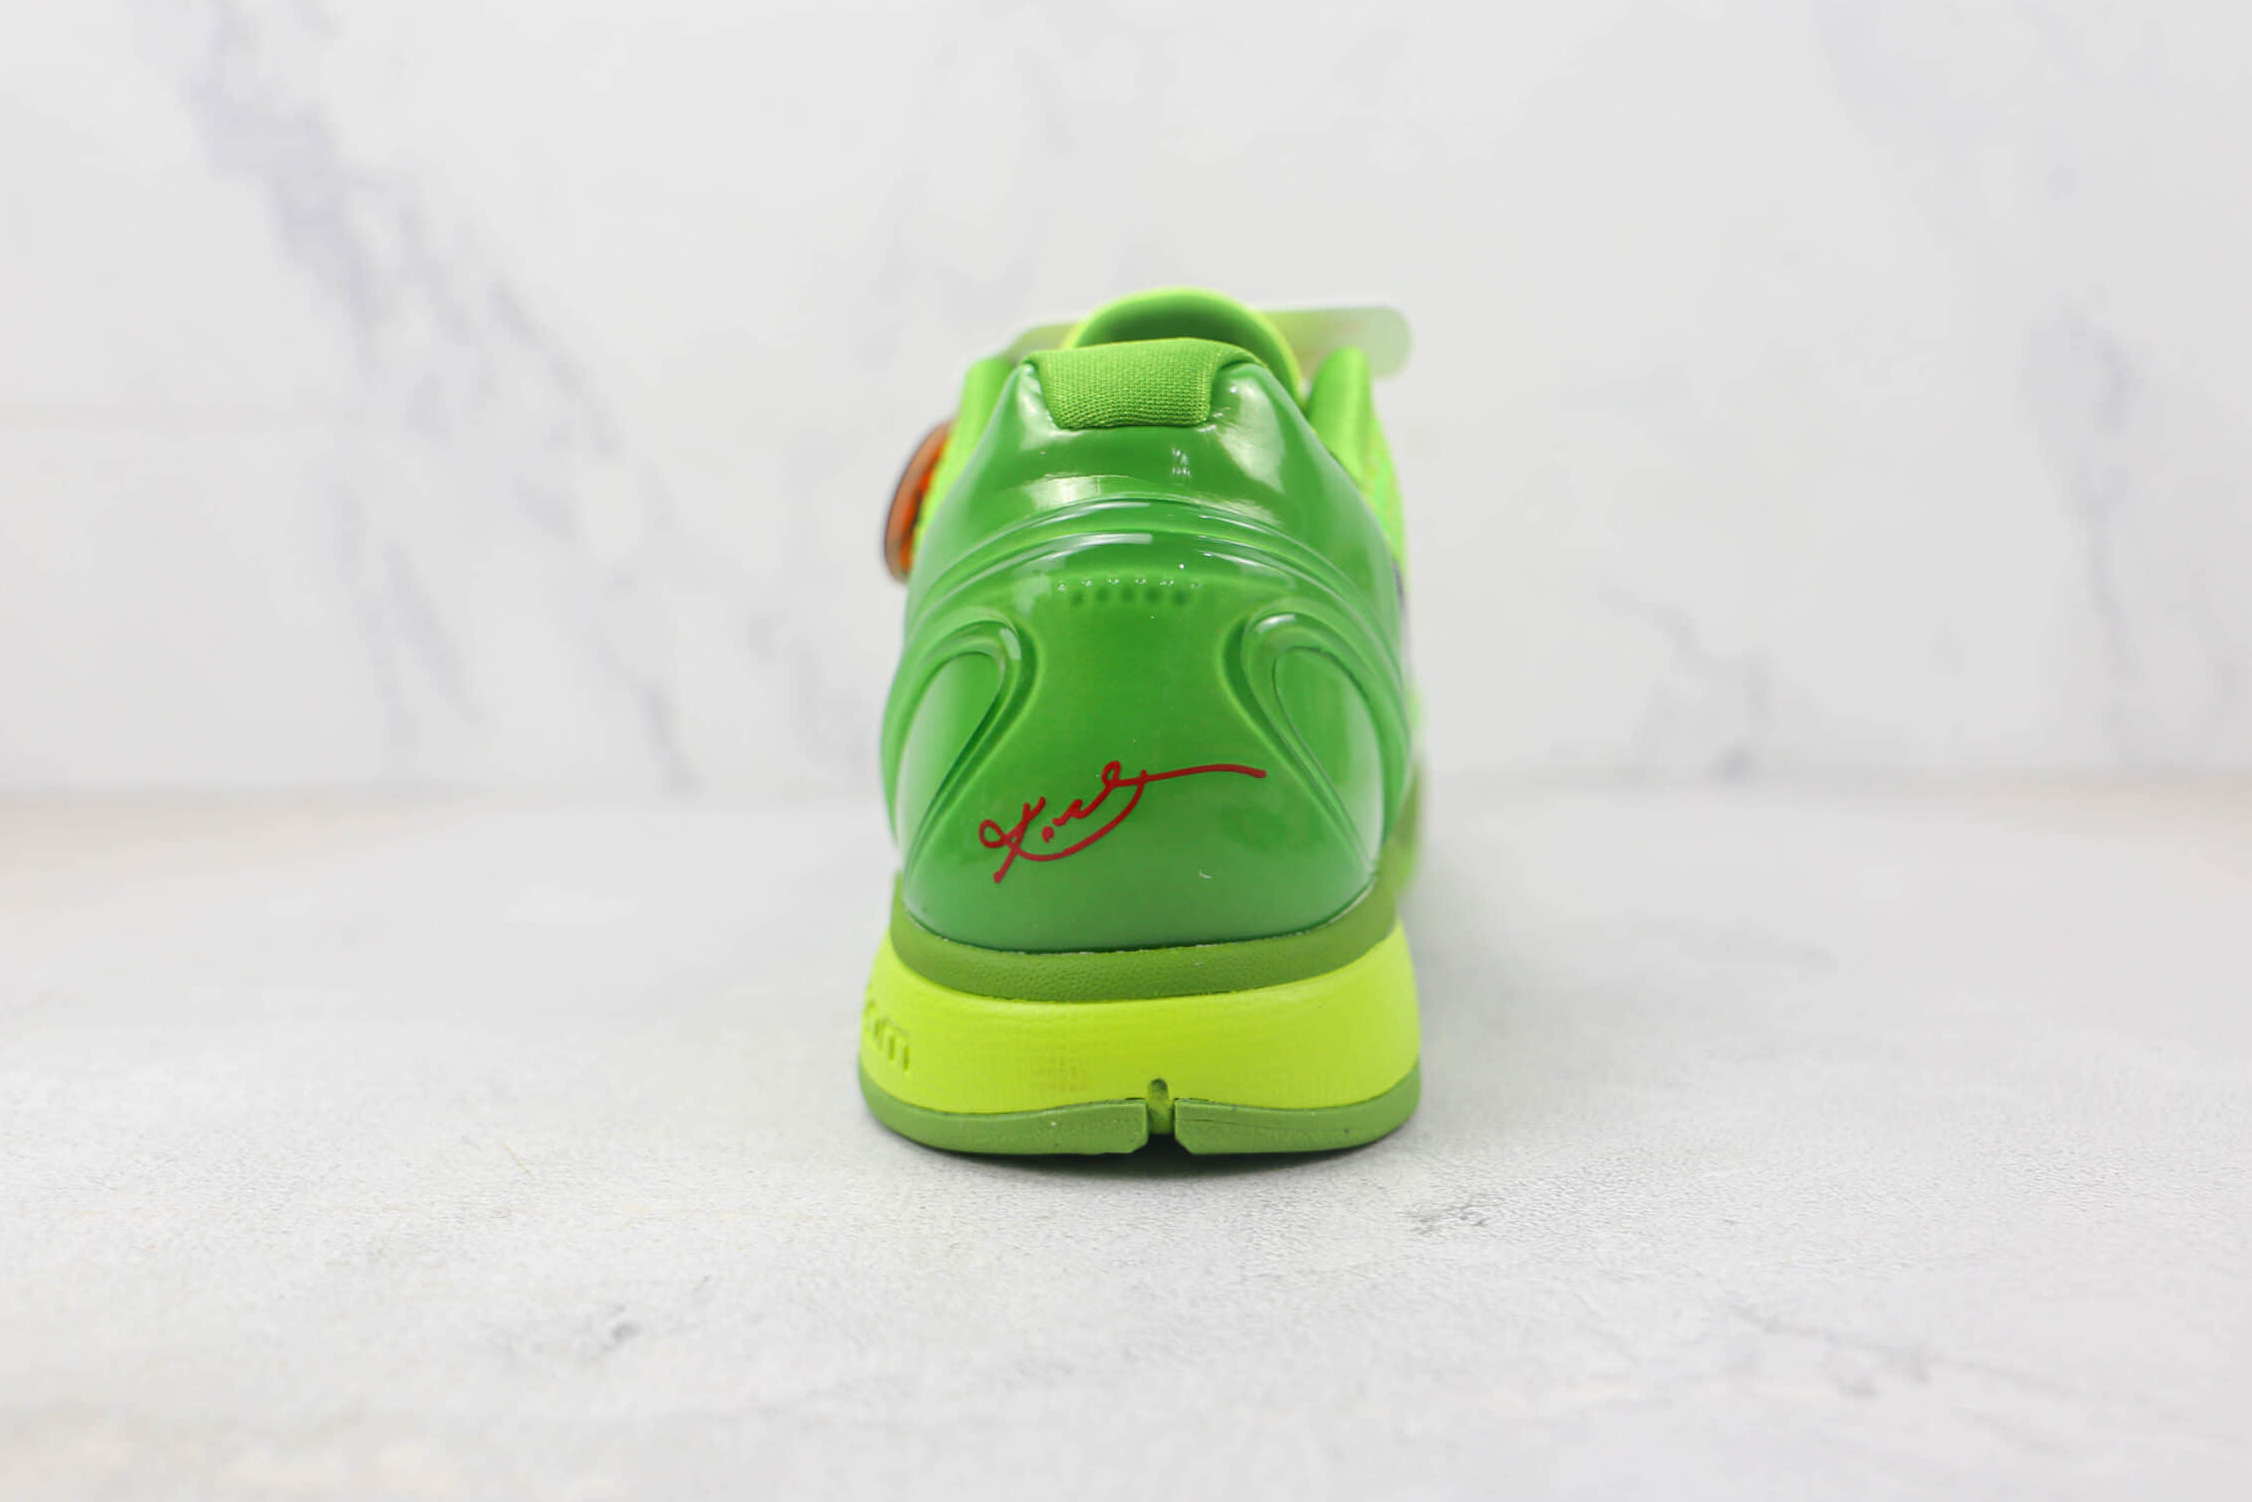 Nike Zoom Kobe 6 Protro 'Grinch' CW2190-300 - Limited Edition Sneakers